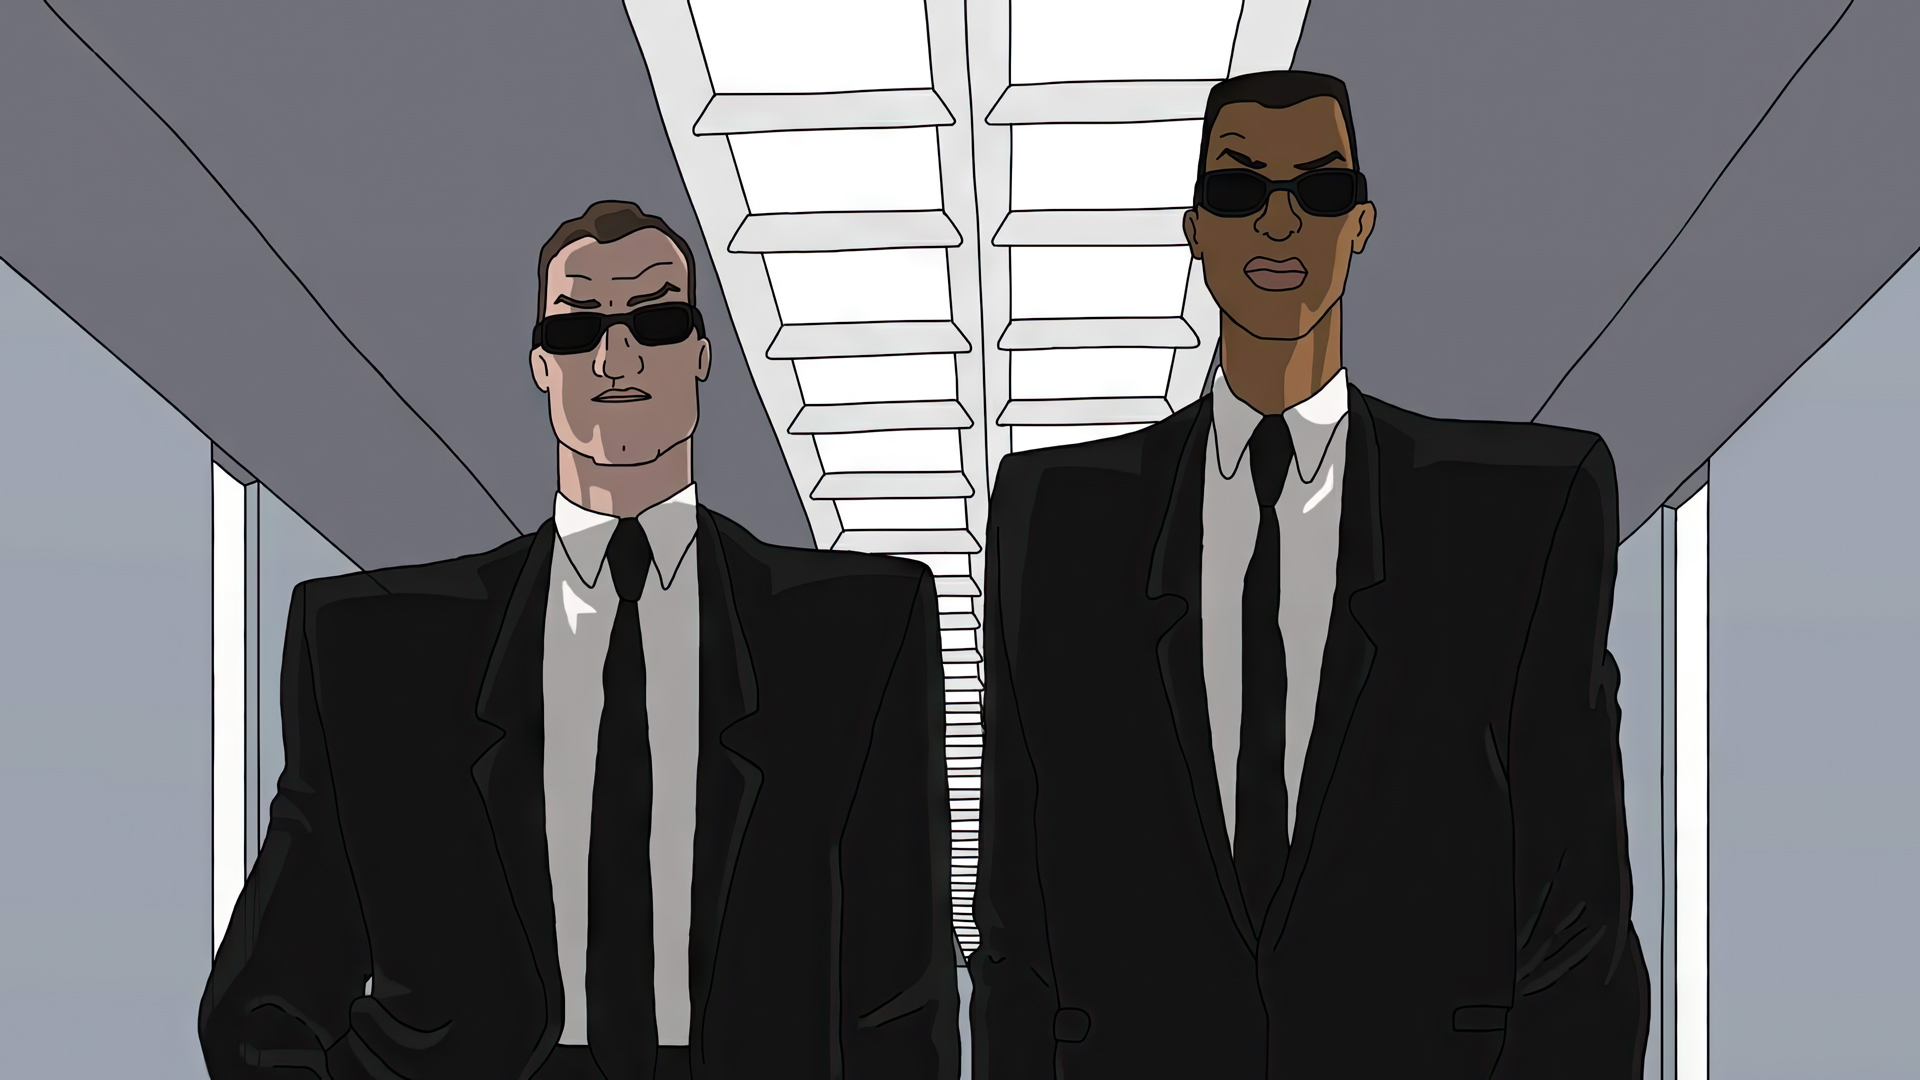 General 1920x1080 Men in Black animated series cartoon animation Agent K Agent J suit and tie sunglasses